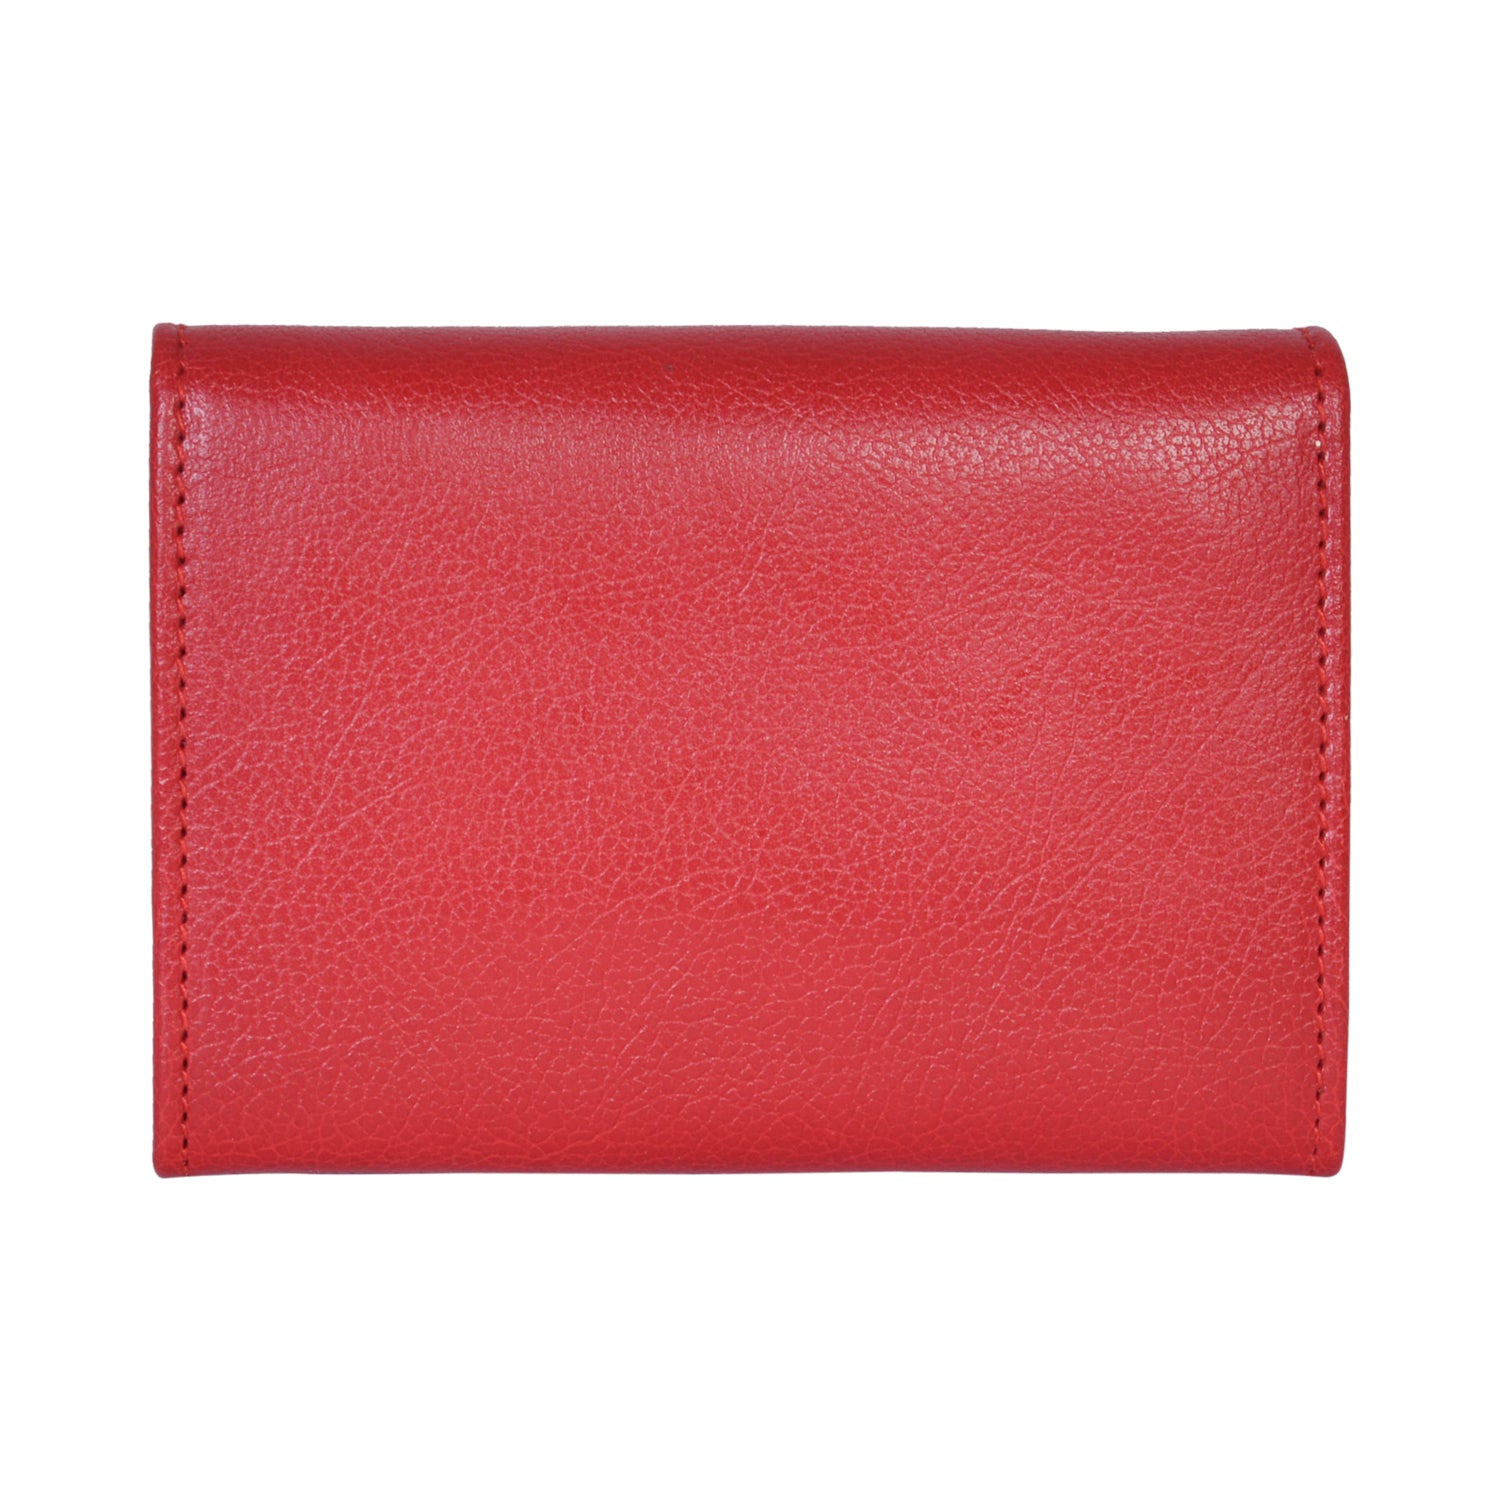 IL BISONTE LIBERTY WOMEN'S  WALLET  IN RED GRAIN COWHIDE LEATHER